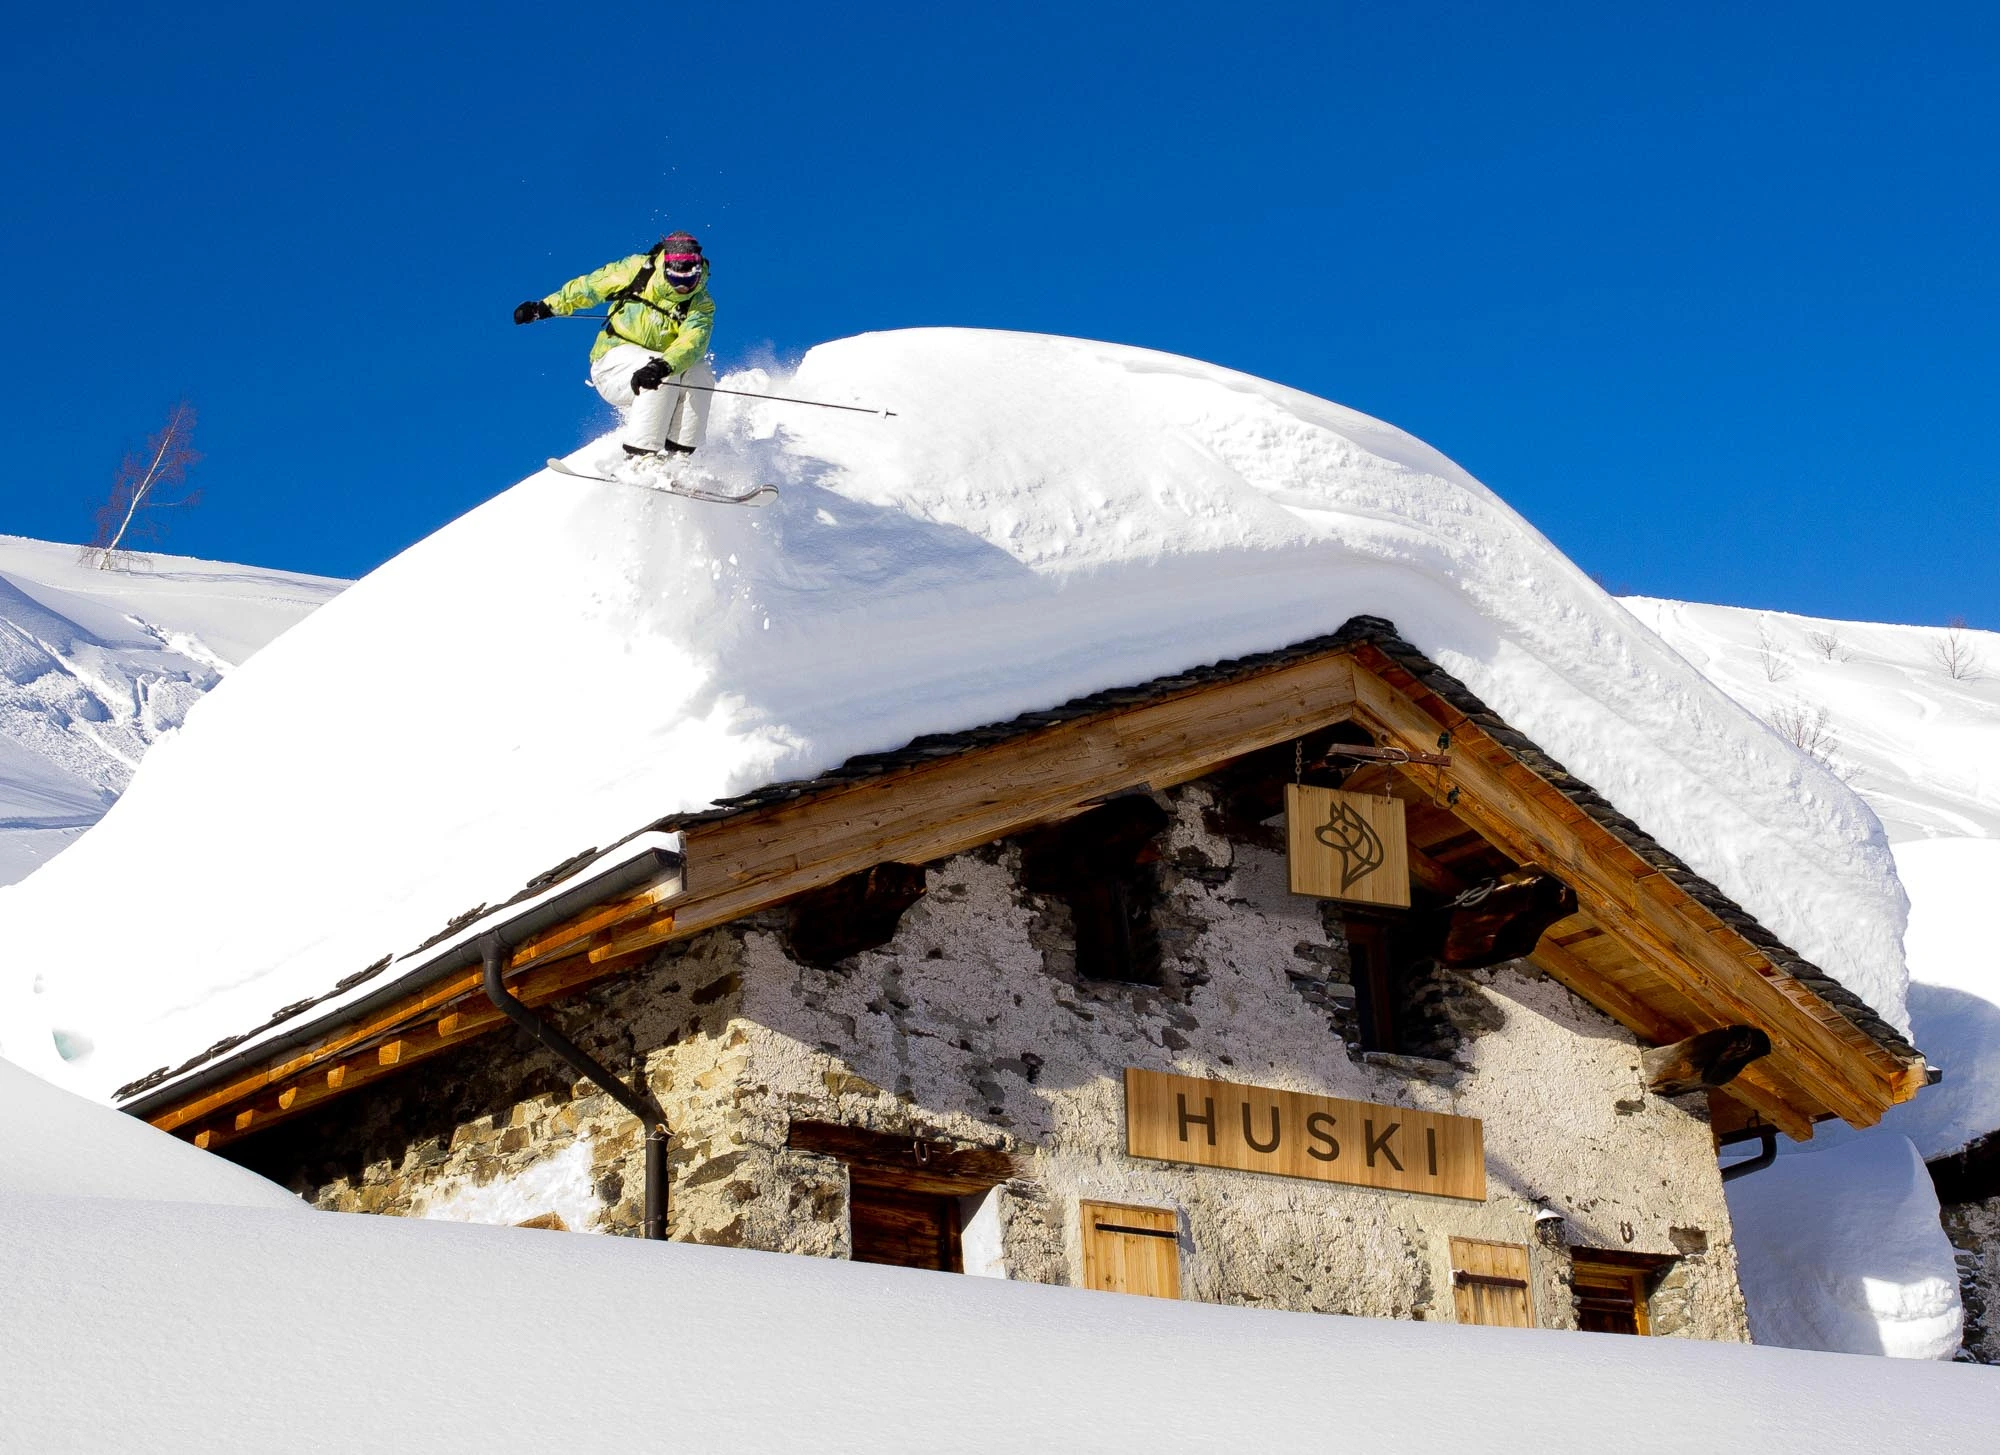 a stone chalet covered in snow, with a skier jumping off the roof maybe 2 metres deep with fresh snow